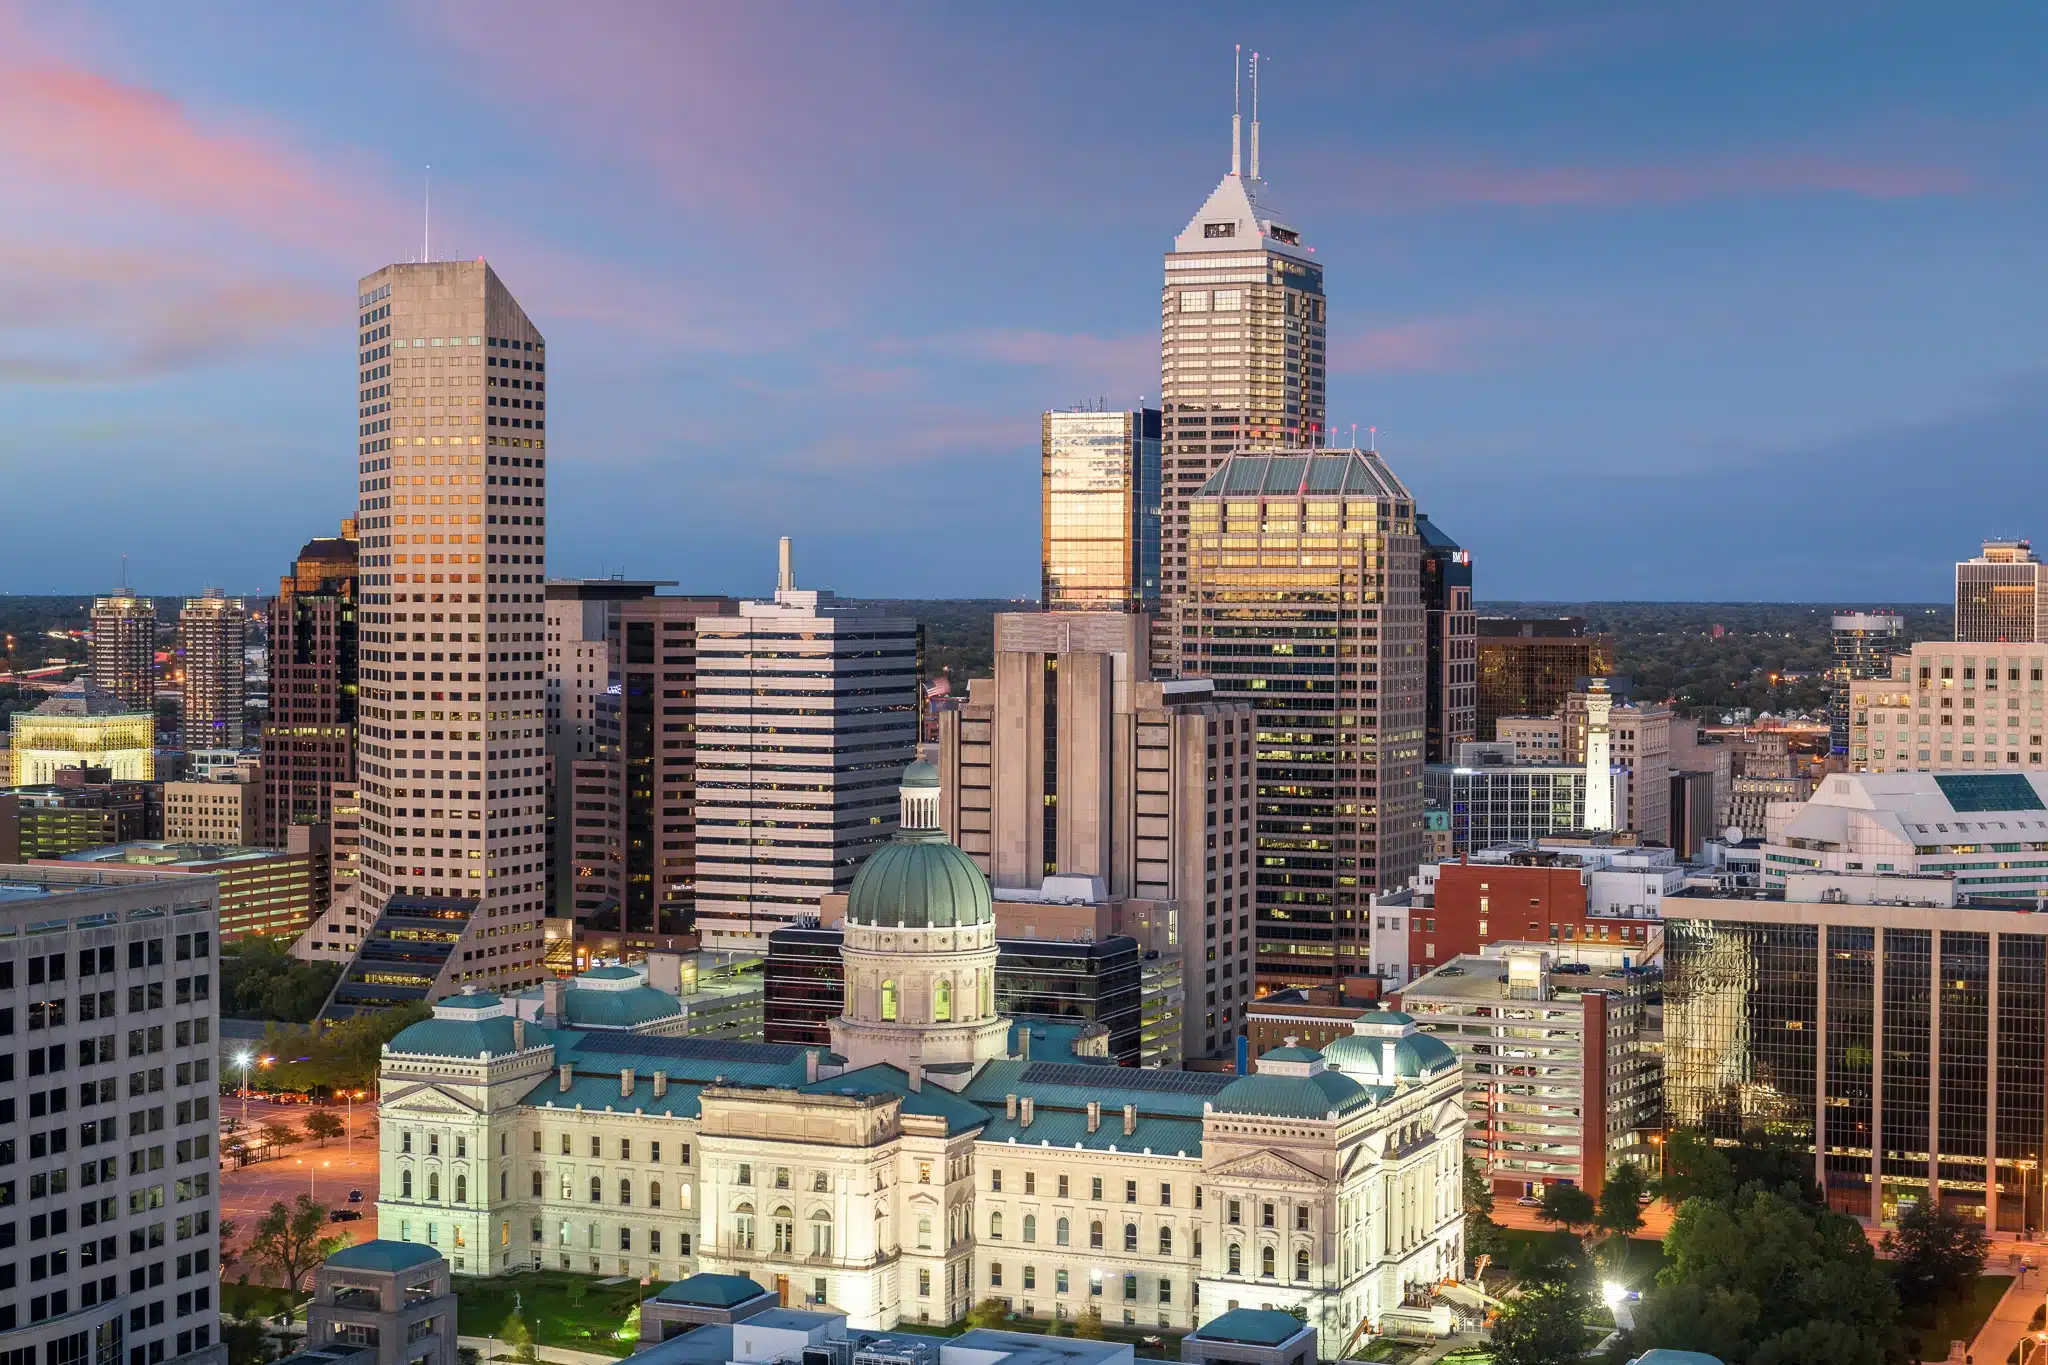 Panoramic view of the stunning Indianapolis skyline, showcasing the city's iconic architecture and landmarks